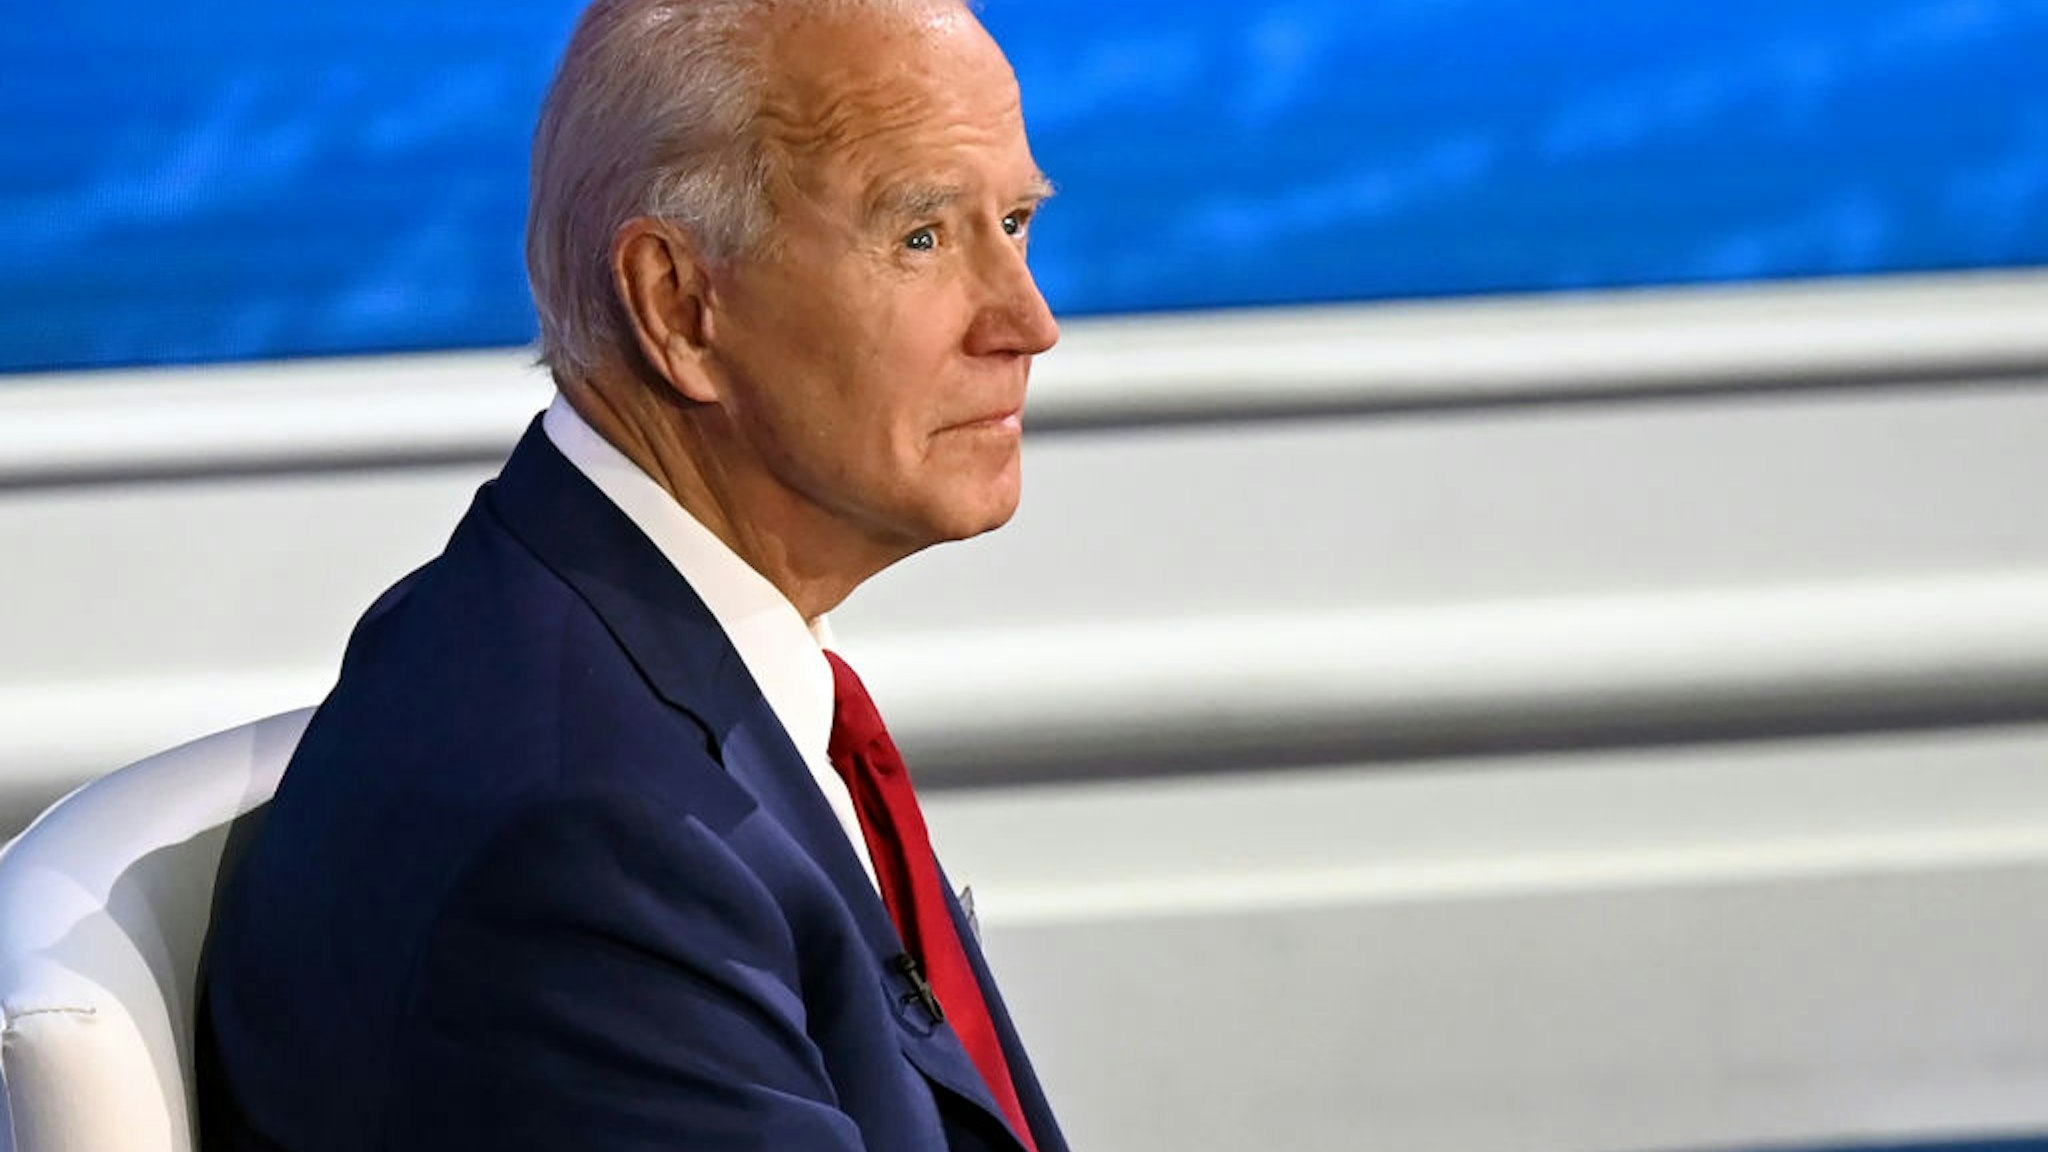 Democratic Presidential candidate and former US Vice President Joe Biden participates in an ABC News town hall